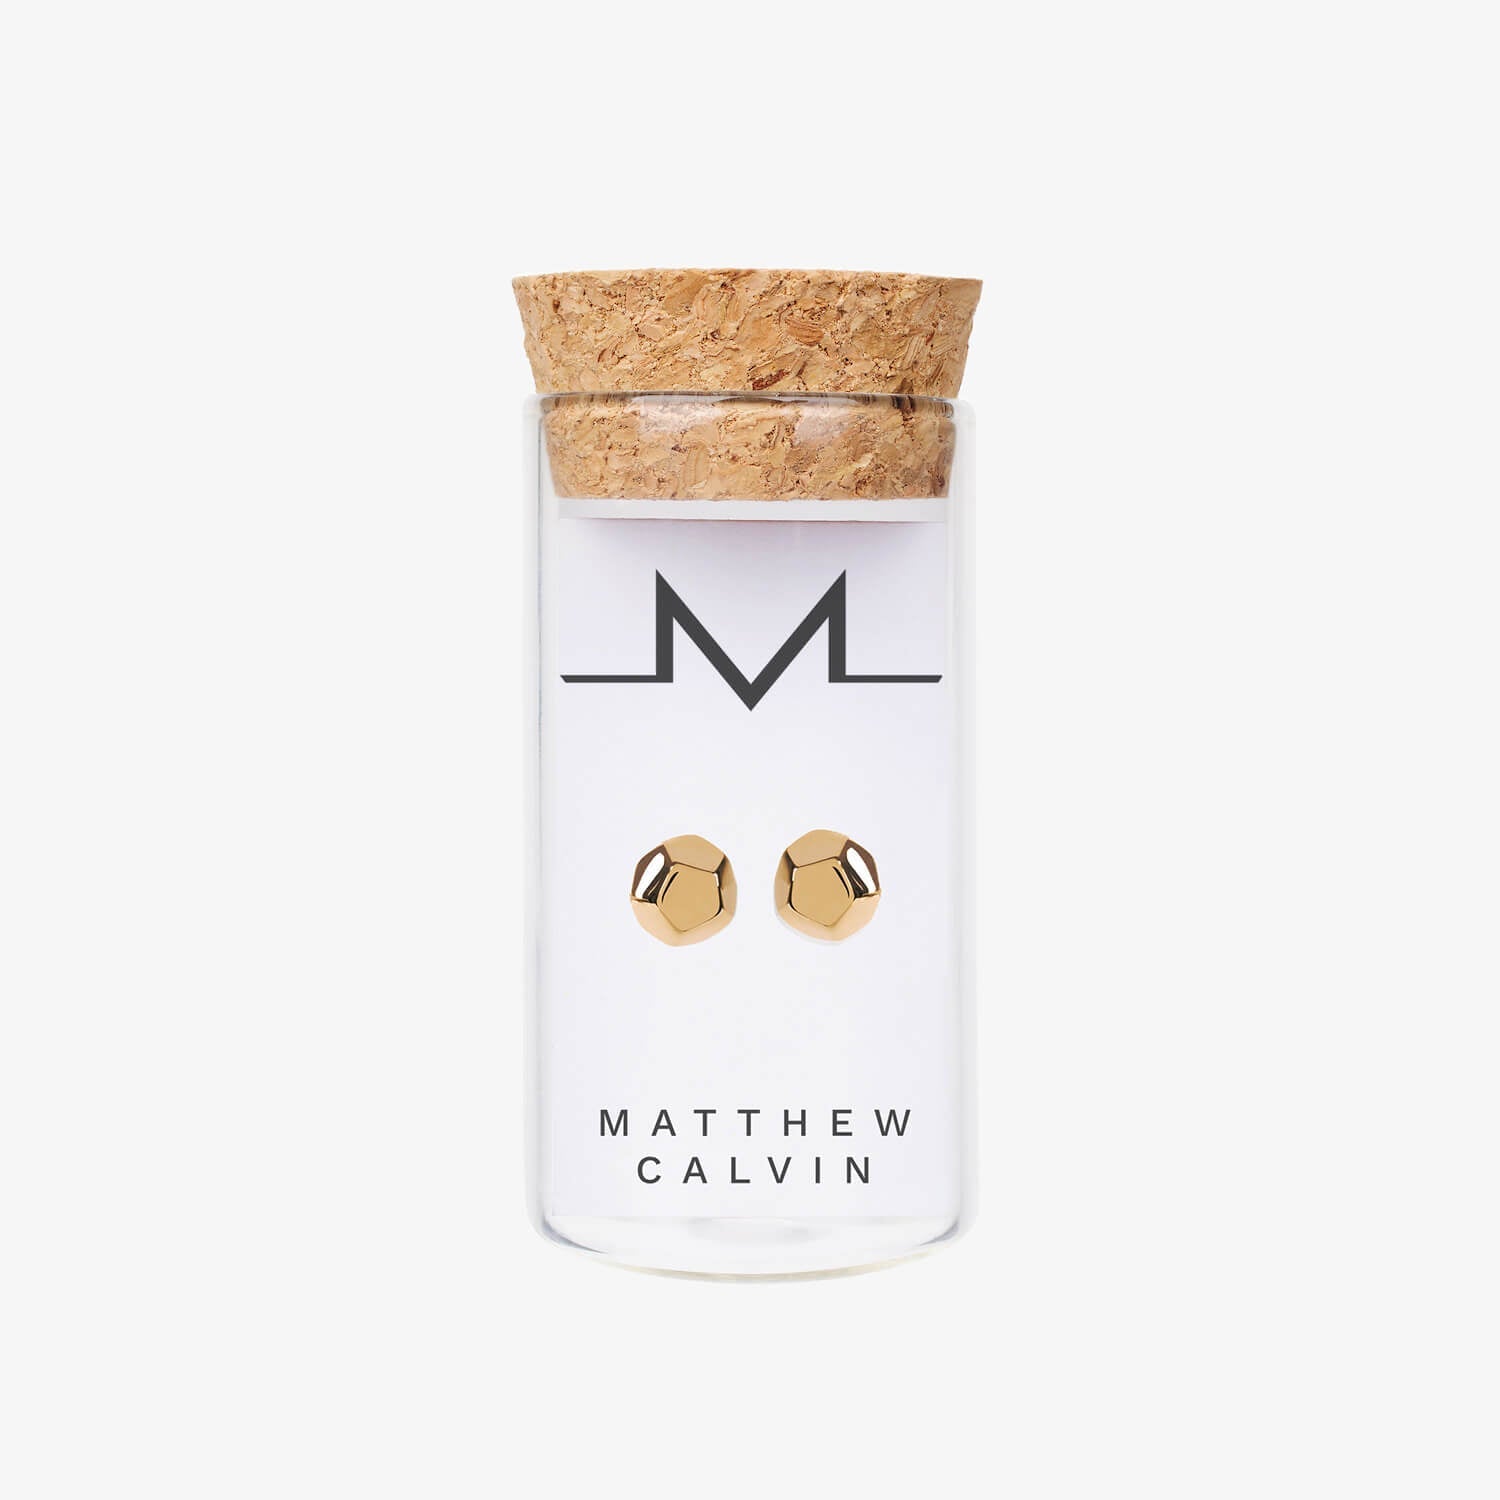 Matthew Calvin gold dodecahedron shaped stud earrings in a glass tube with cork top. 